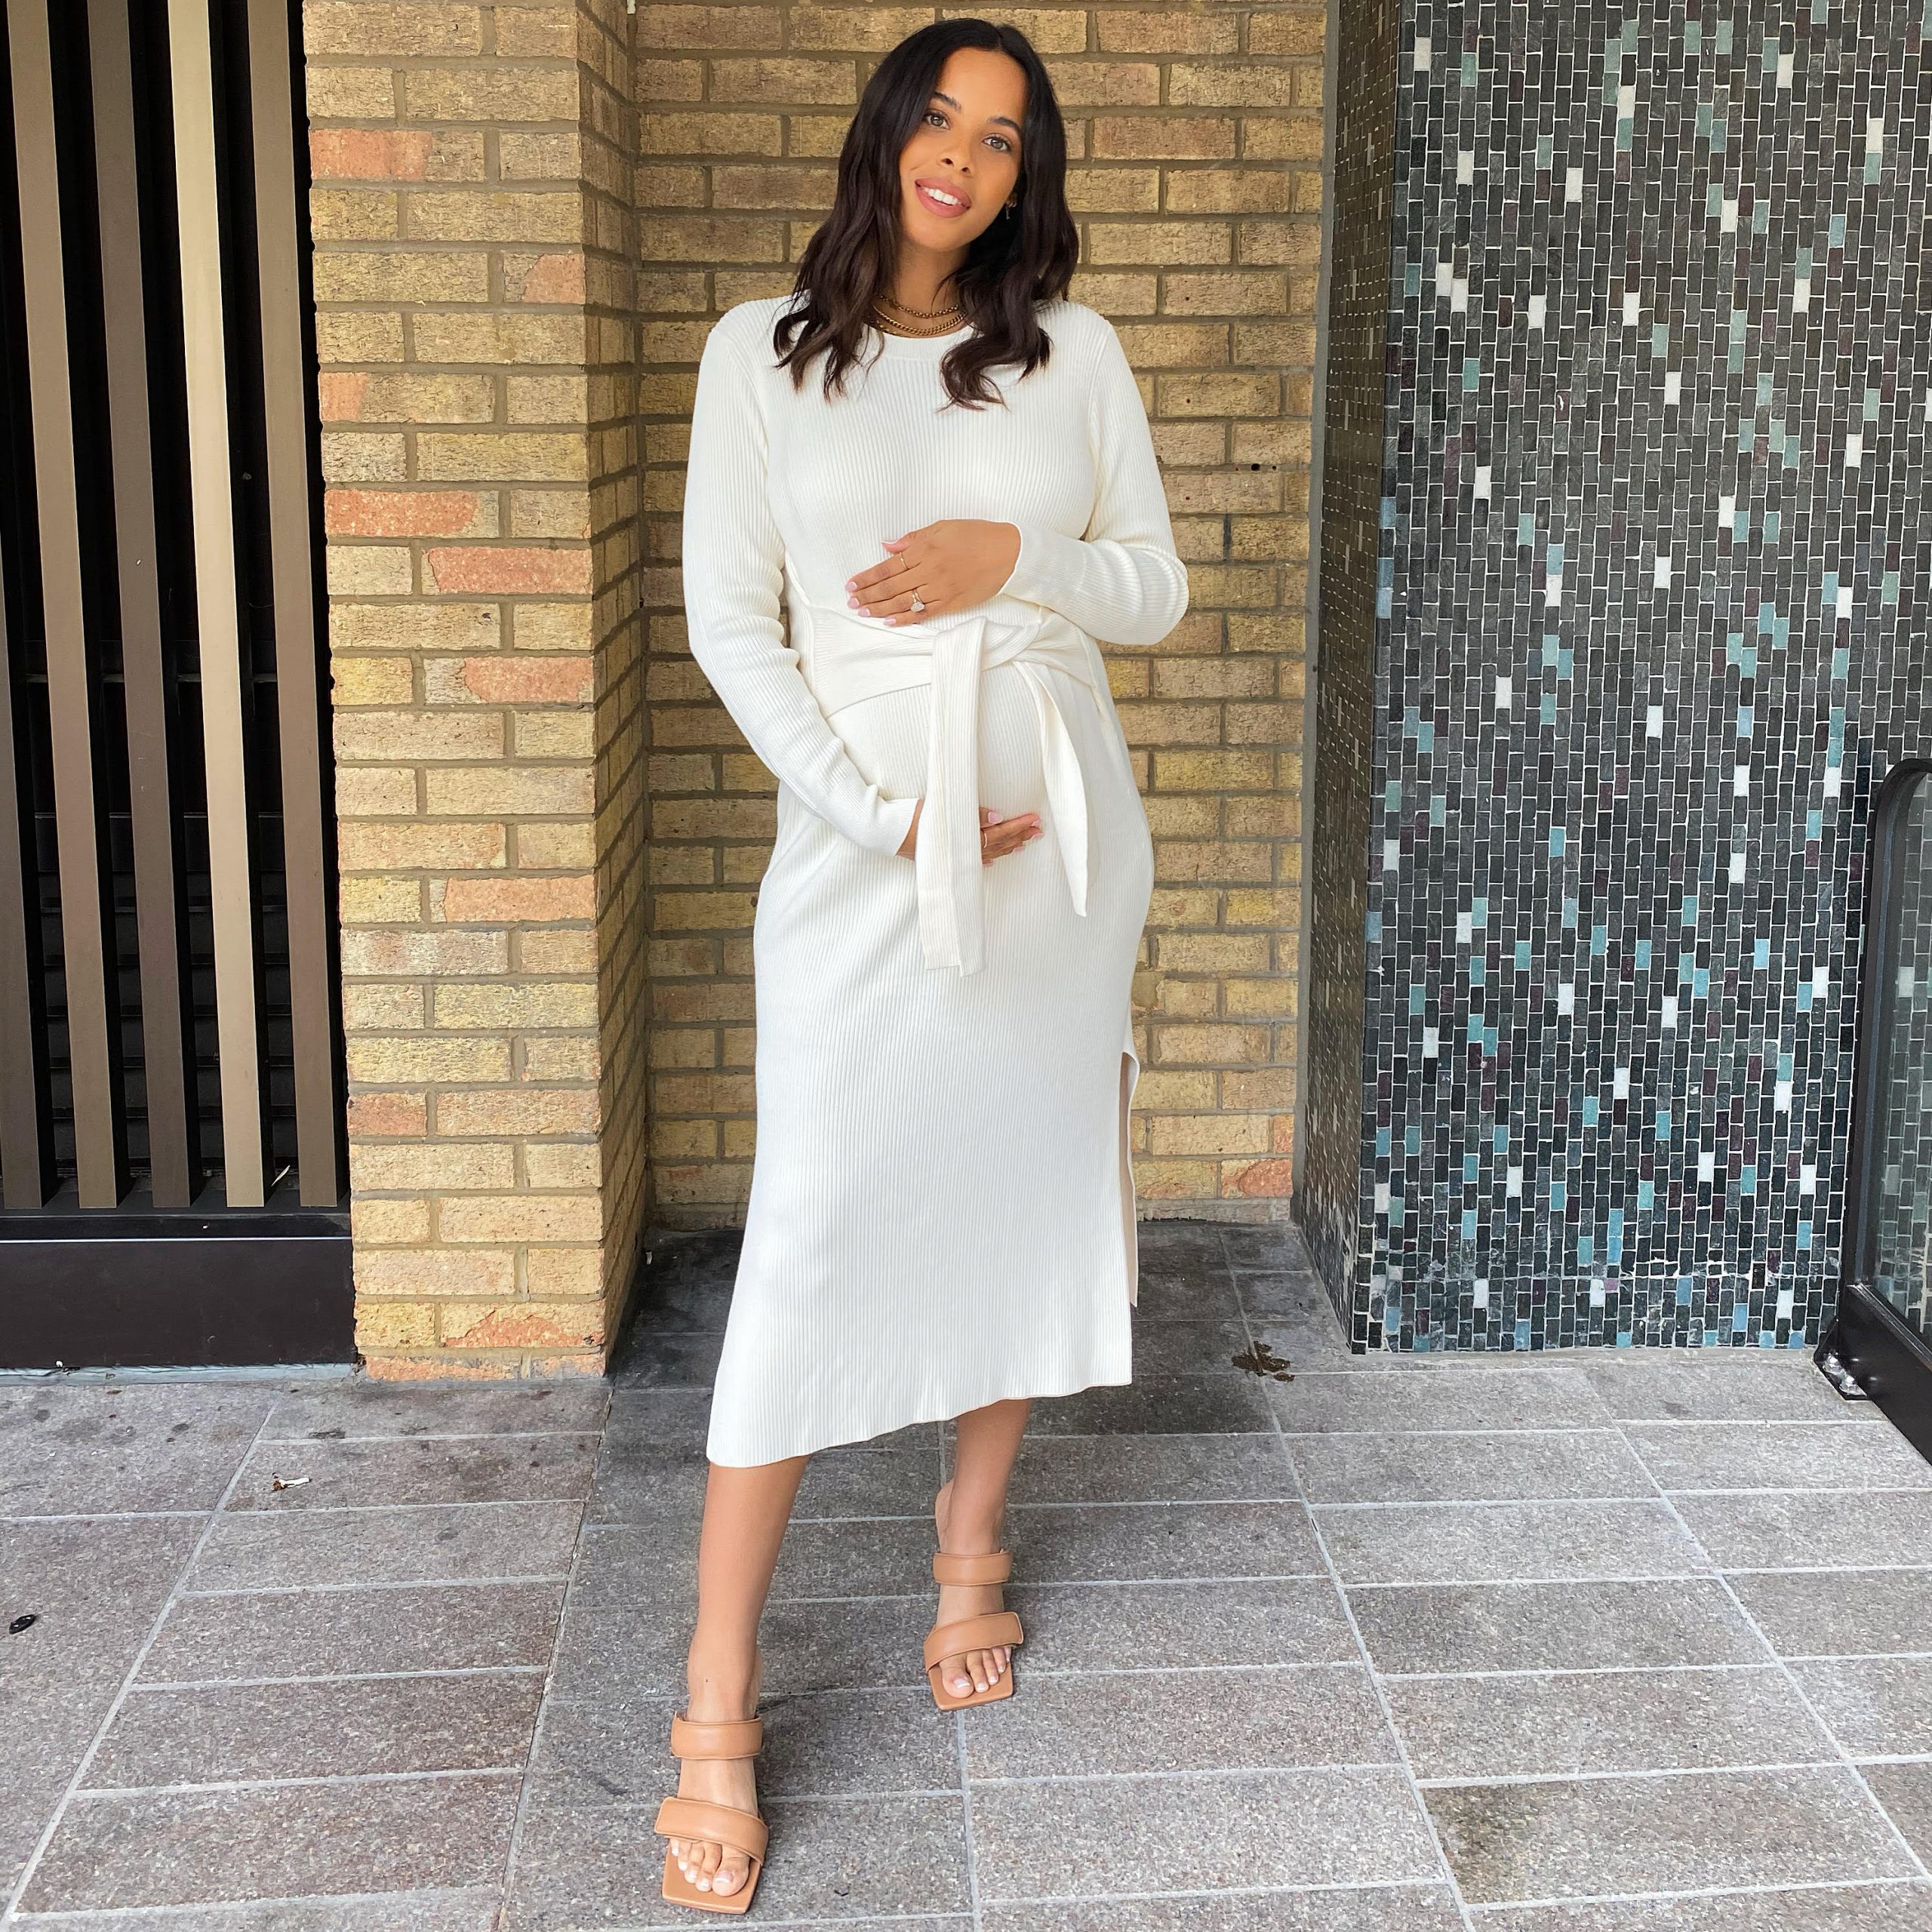 Rochelle Humes Teams Up With Amazon to Create Baby Wish List